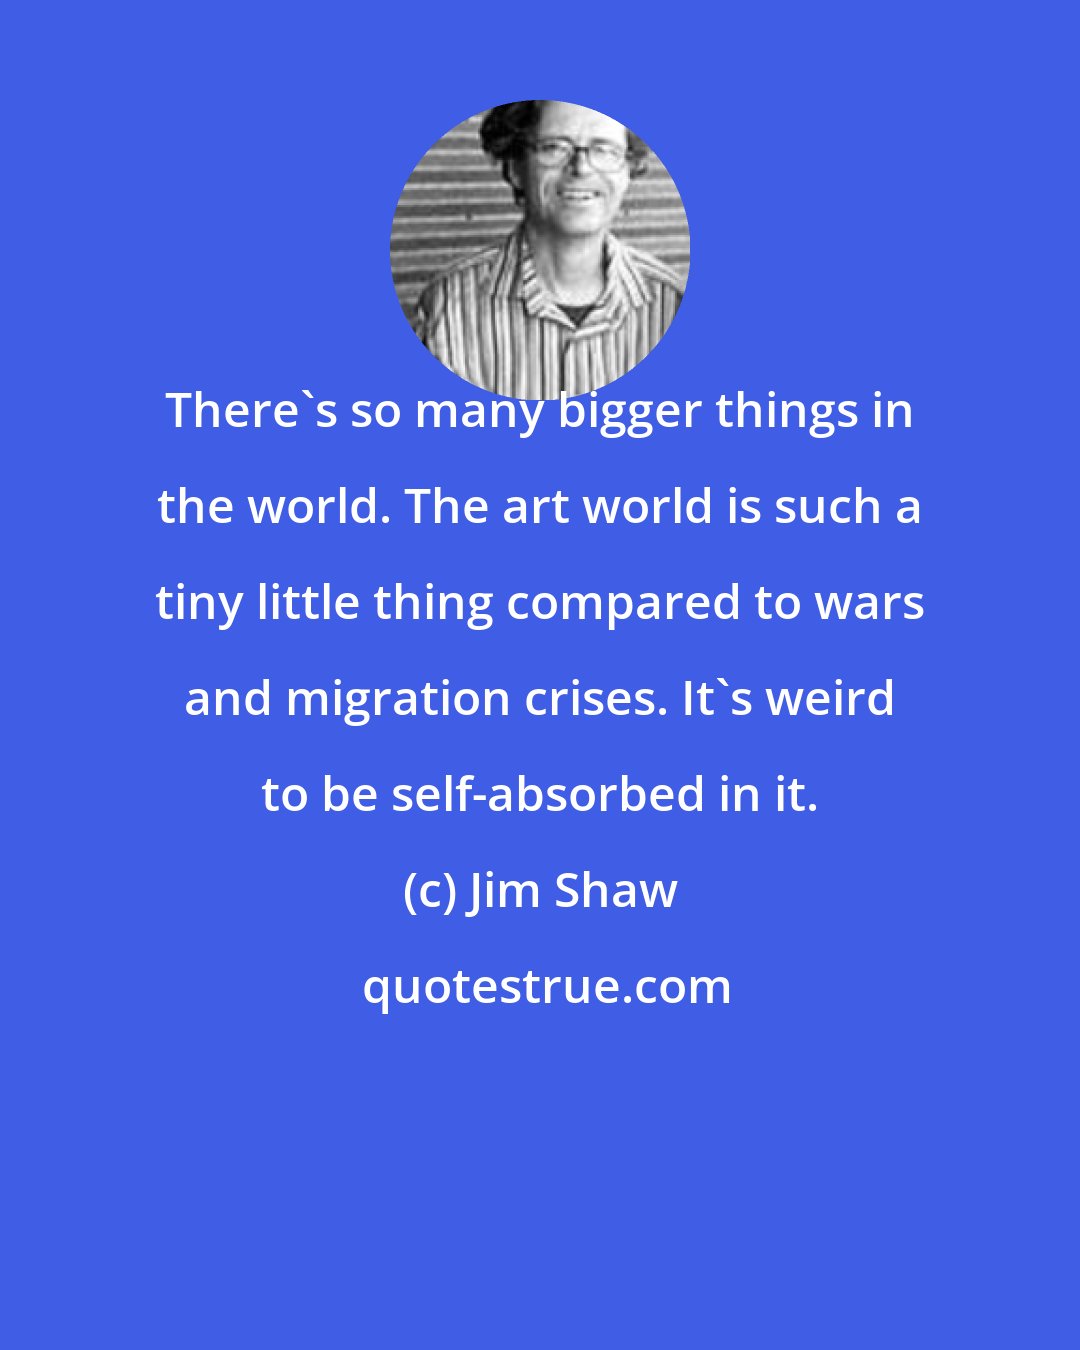 Jim Shaw: There's so many bigger things in the world. The art world is such a tiny little thing compared to wars and migration crises. It's weird to be self-absorbed in it.